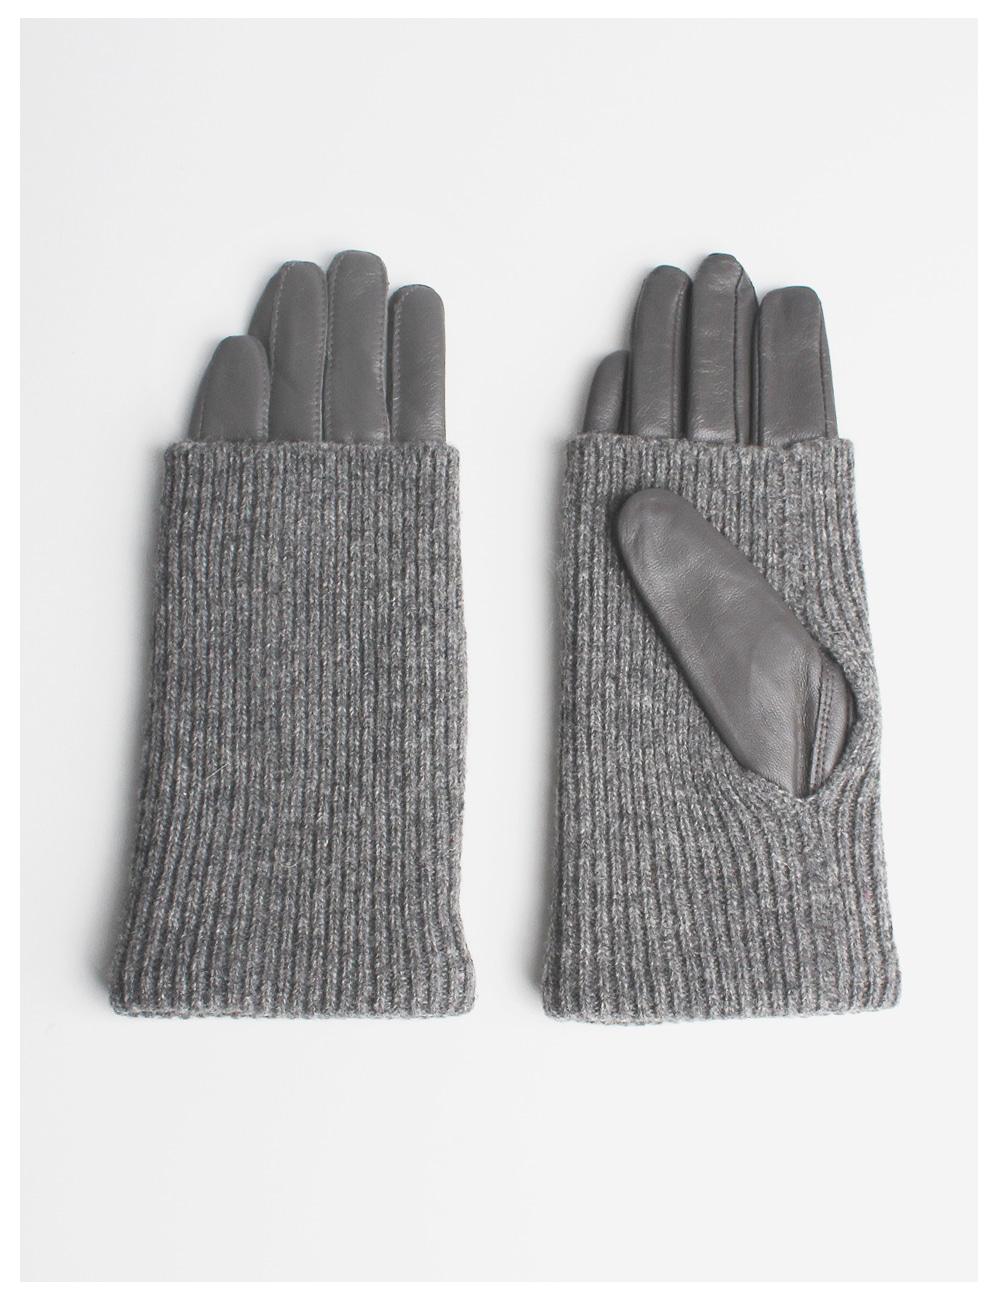 Roll &amp; Rong leather Gloves 워머스타일 가죽 장갑